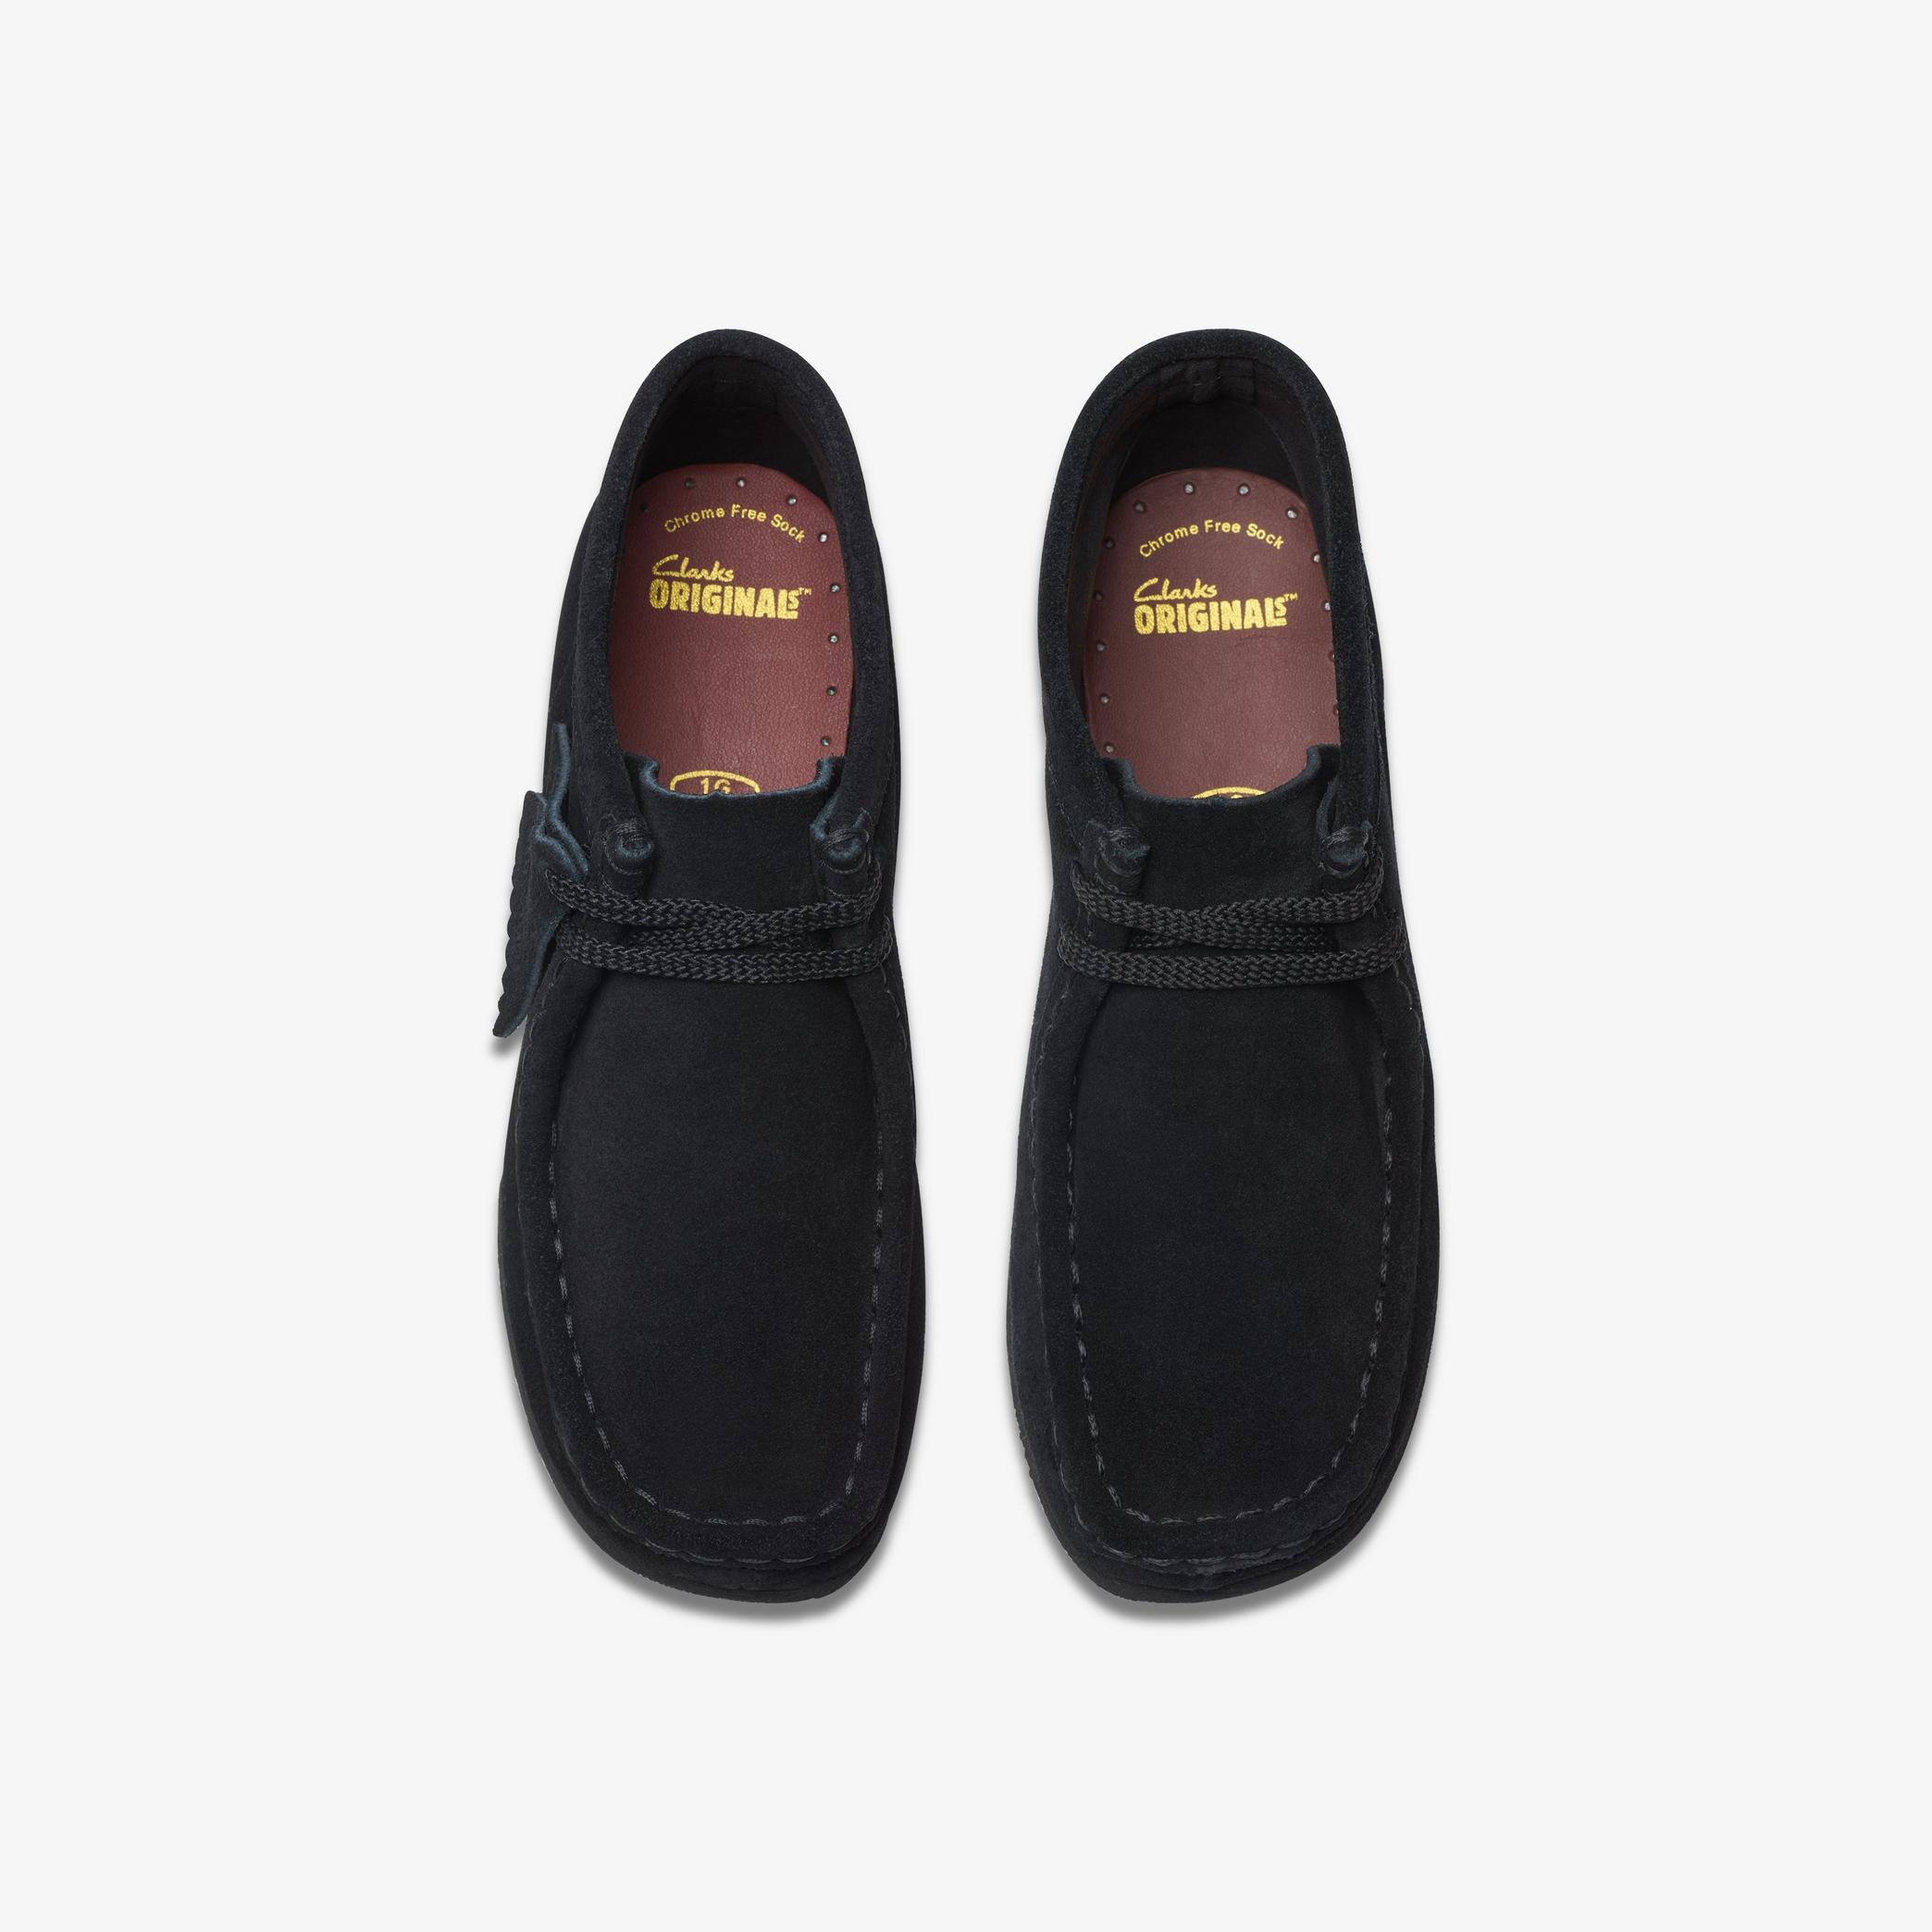 BOYS Wallabee Boot Older Black Suede Boots | Clarks US